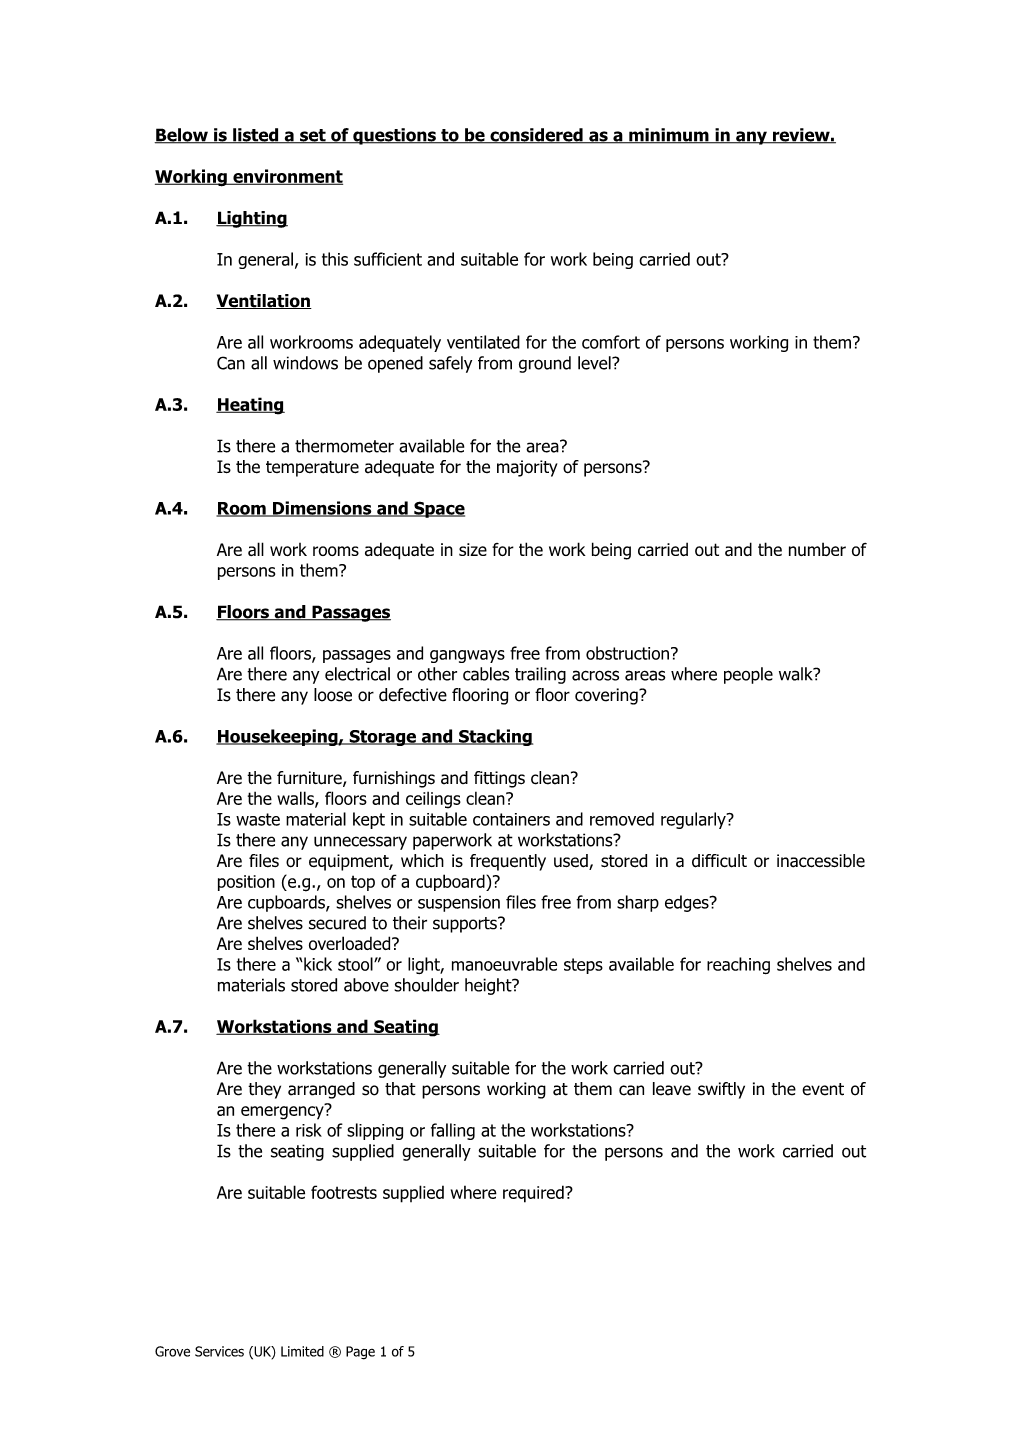 Below Is Listed a Set of Questions to Be Considered As a Minimum in Any Review